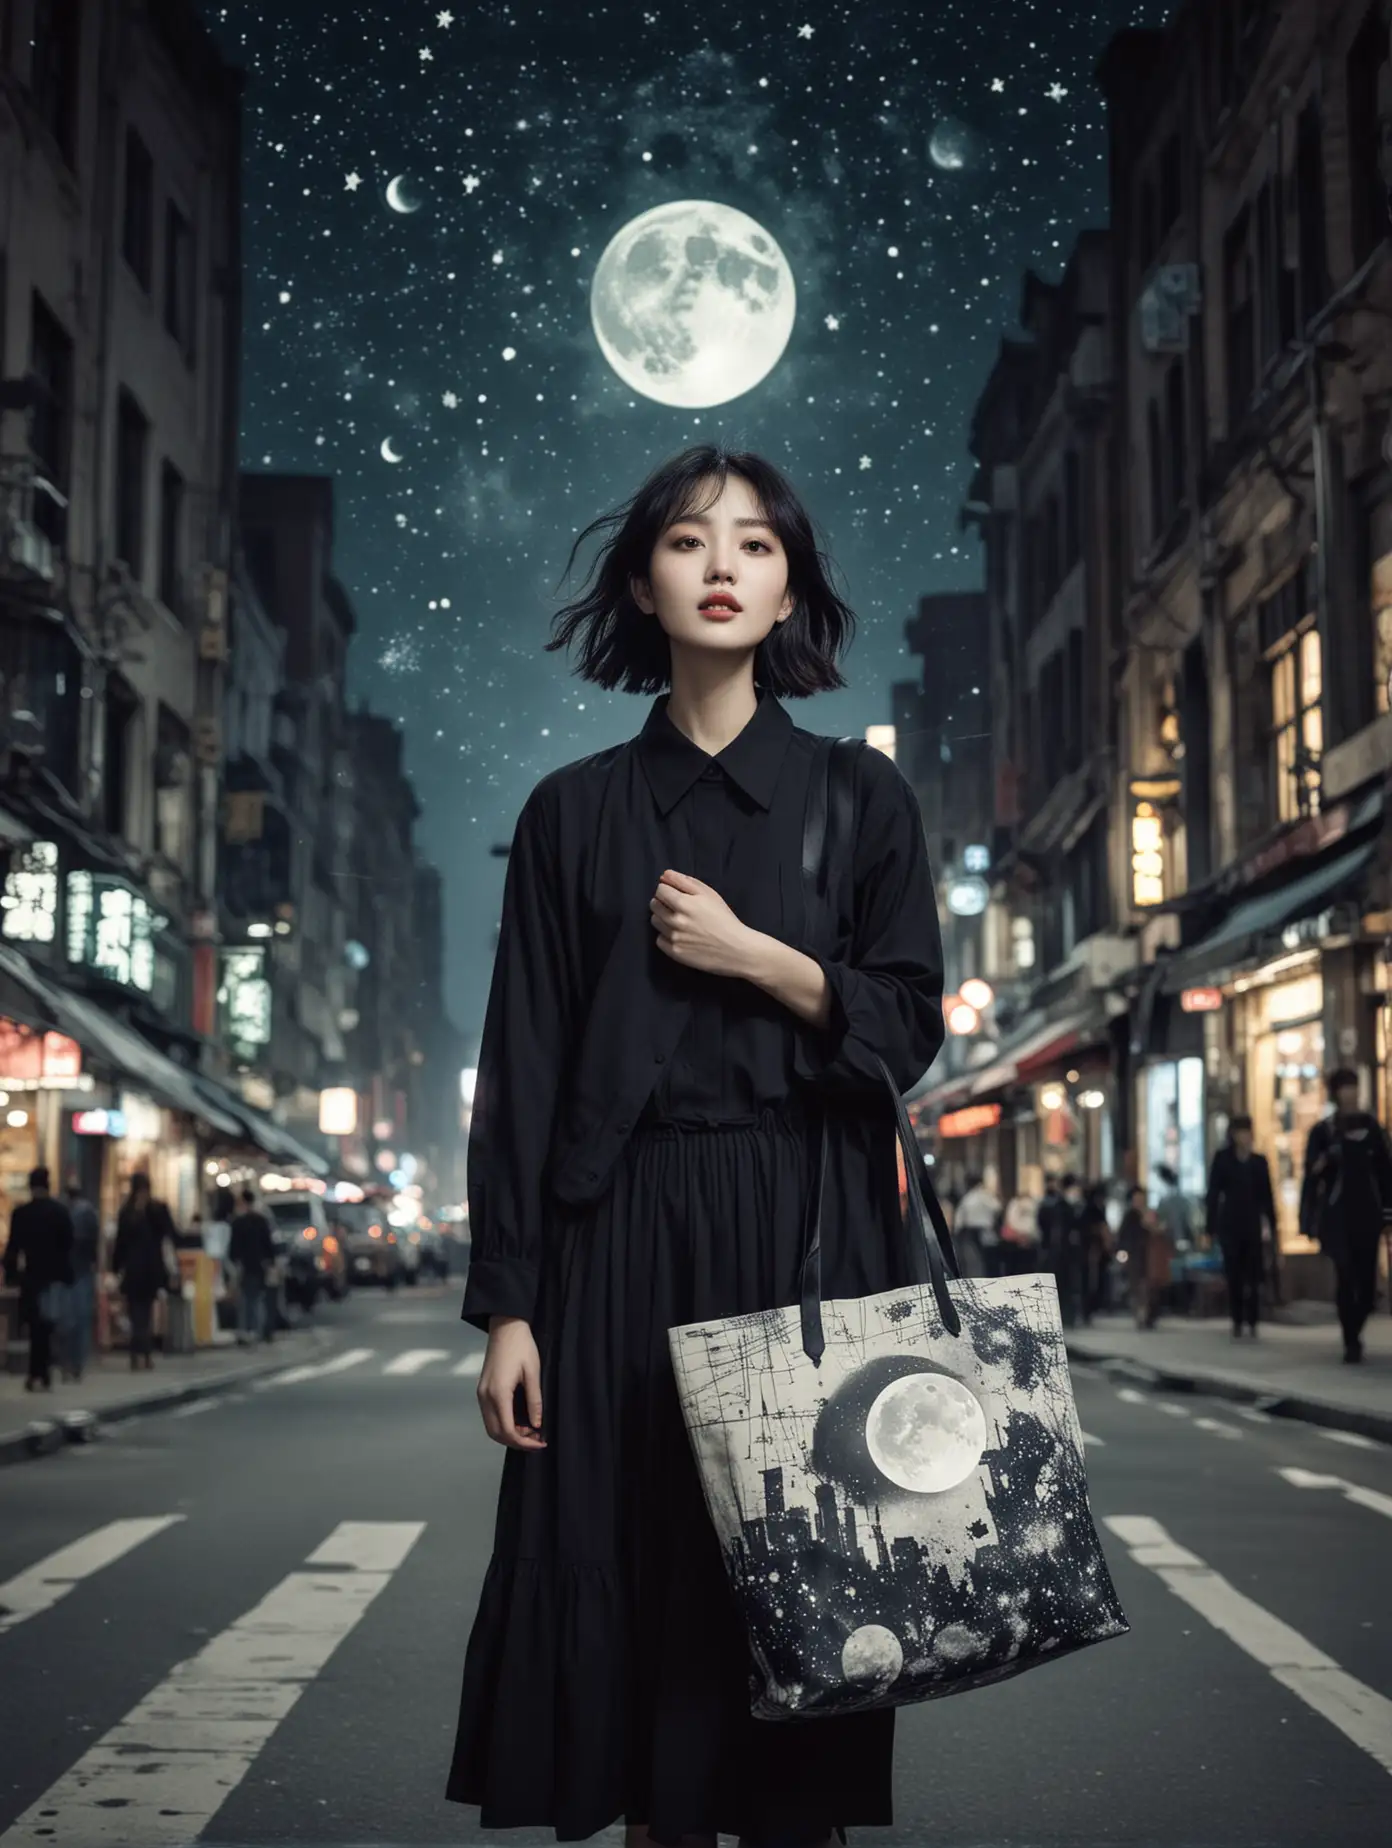 [Modern Gao Yuanyuan, Shanghai fashion, black shopper bag held with a sense of momentum, posing dynamically on a bustling Shanghai street ] dreamy lo-fi photography adds a whimsical touch, high contrast and saturation, while vibrant colors and the presence of scribbles evokes a sense of mystery. The moon and stars in the background illuminate the scene, creating a truly enchanting image. Emphasis on mixed media collage